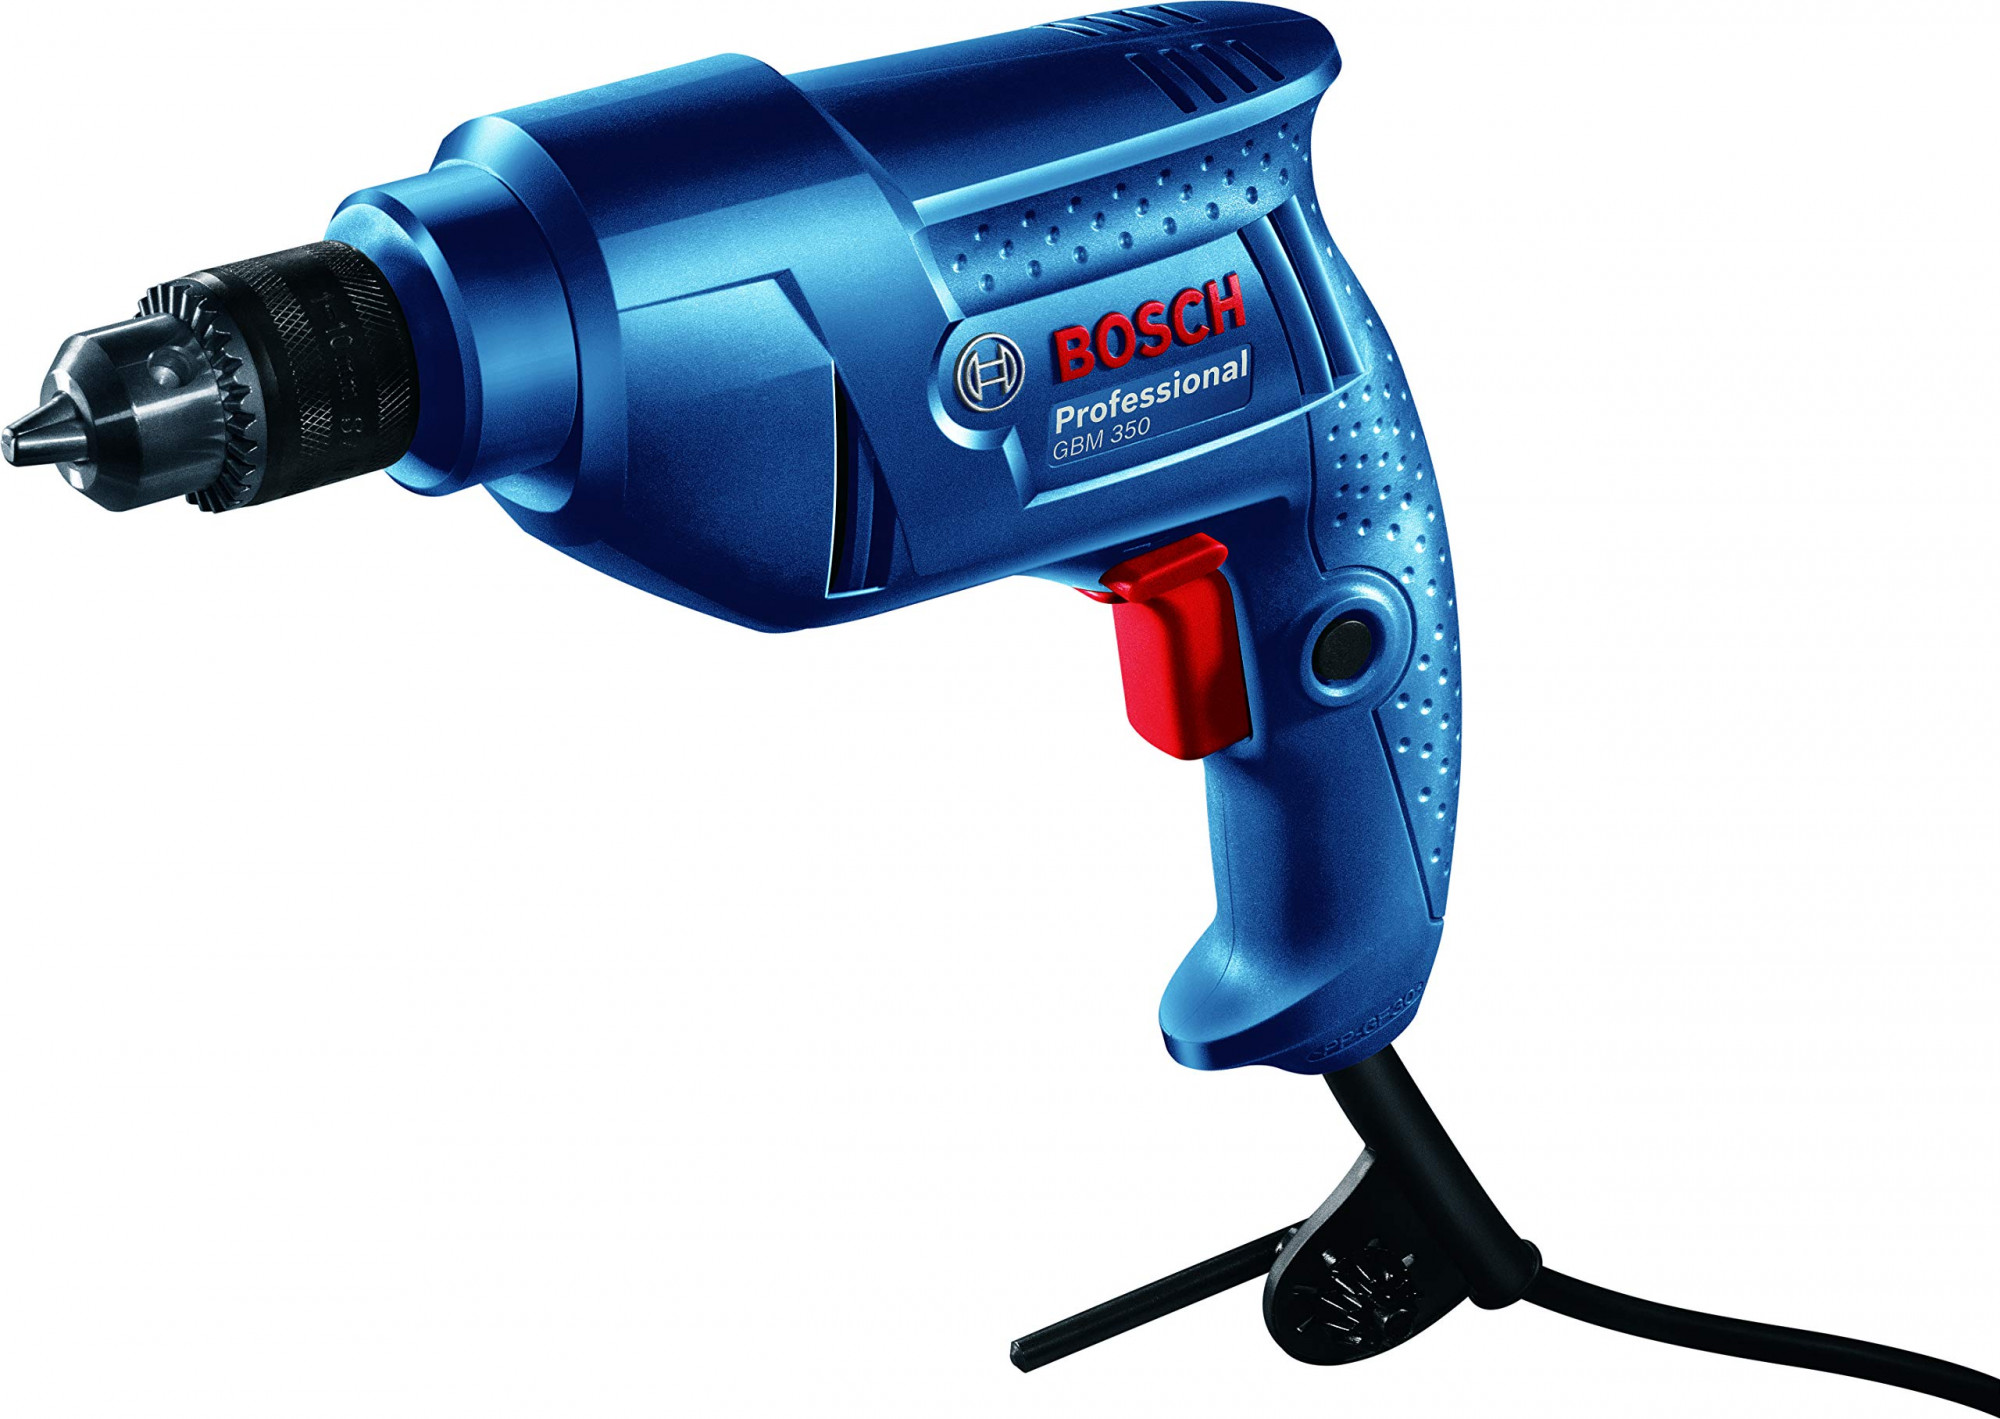 BOSCH GWS 600 professional Angle Grinder for Metal Working (Blue) & Gbm 350 Professional Rotary Drill, Wood & Metal Work (350 Watt Blue),Corded Electric, 1 Pack